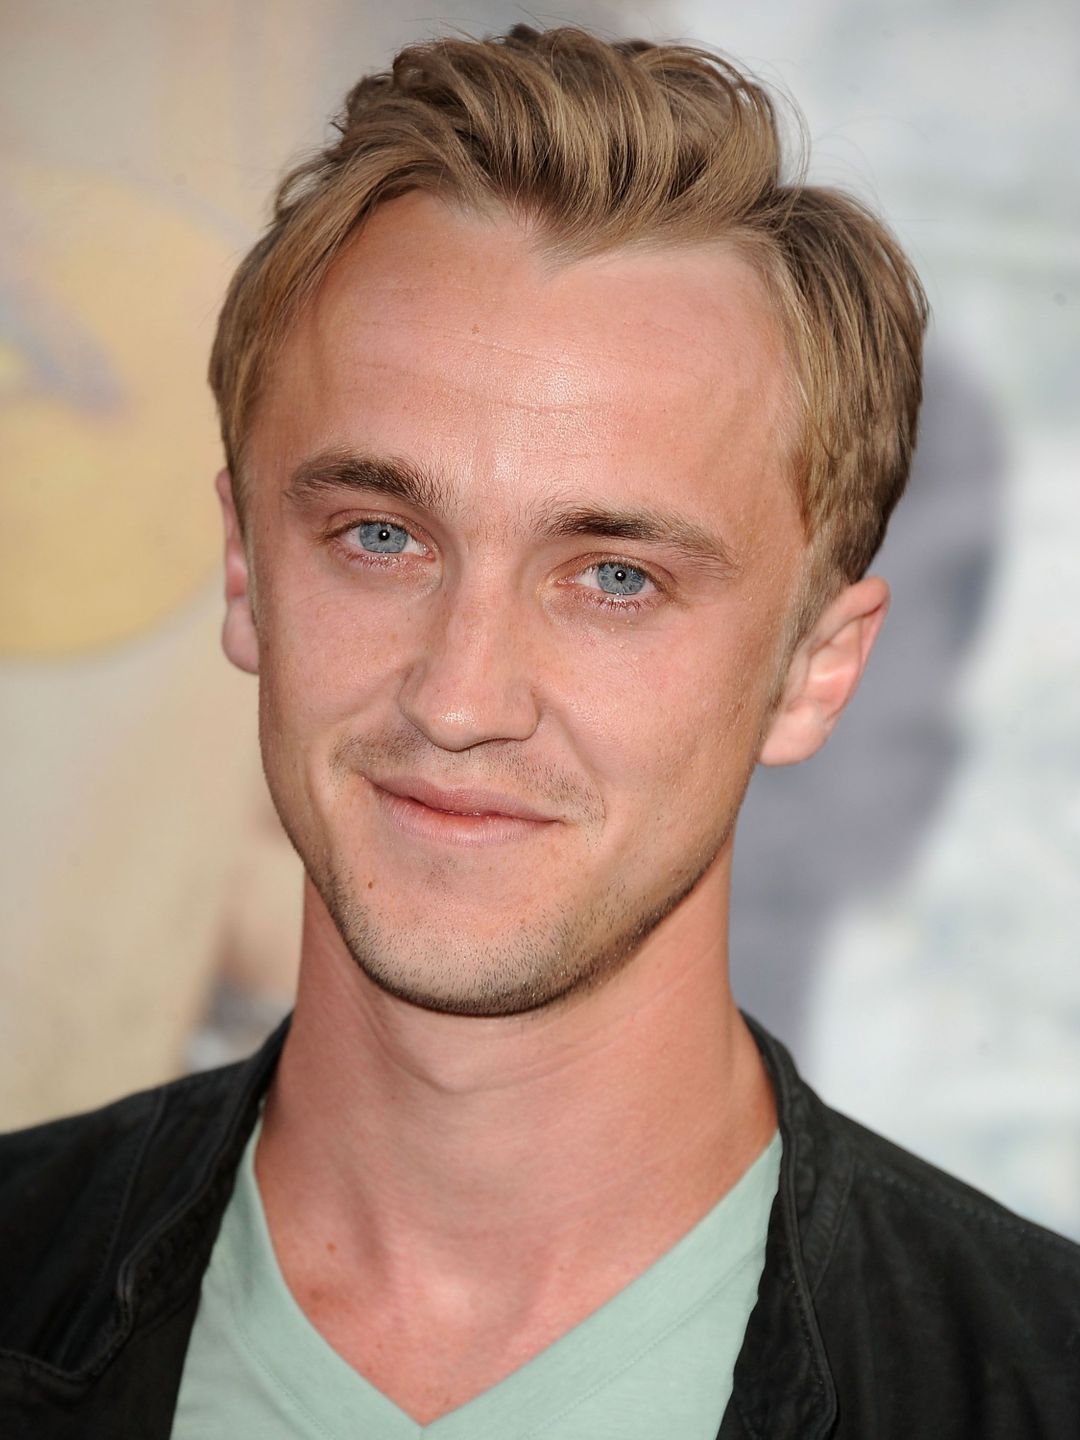 Tom Felton who is his father